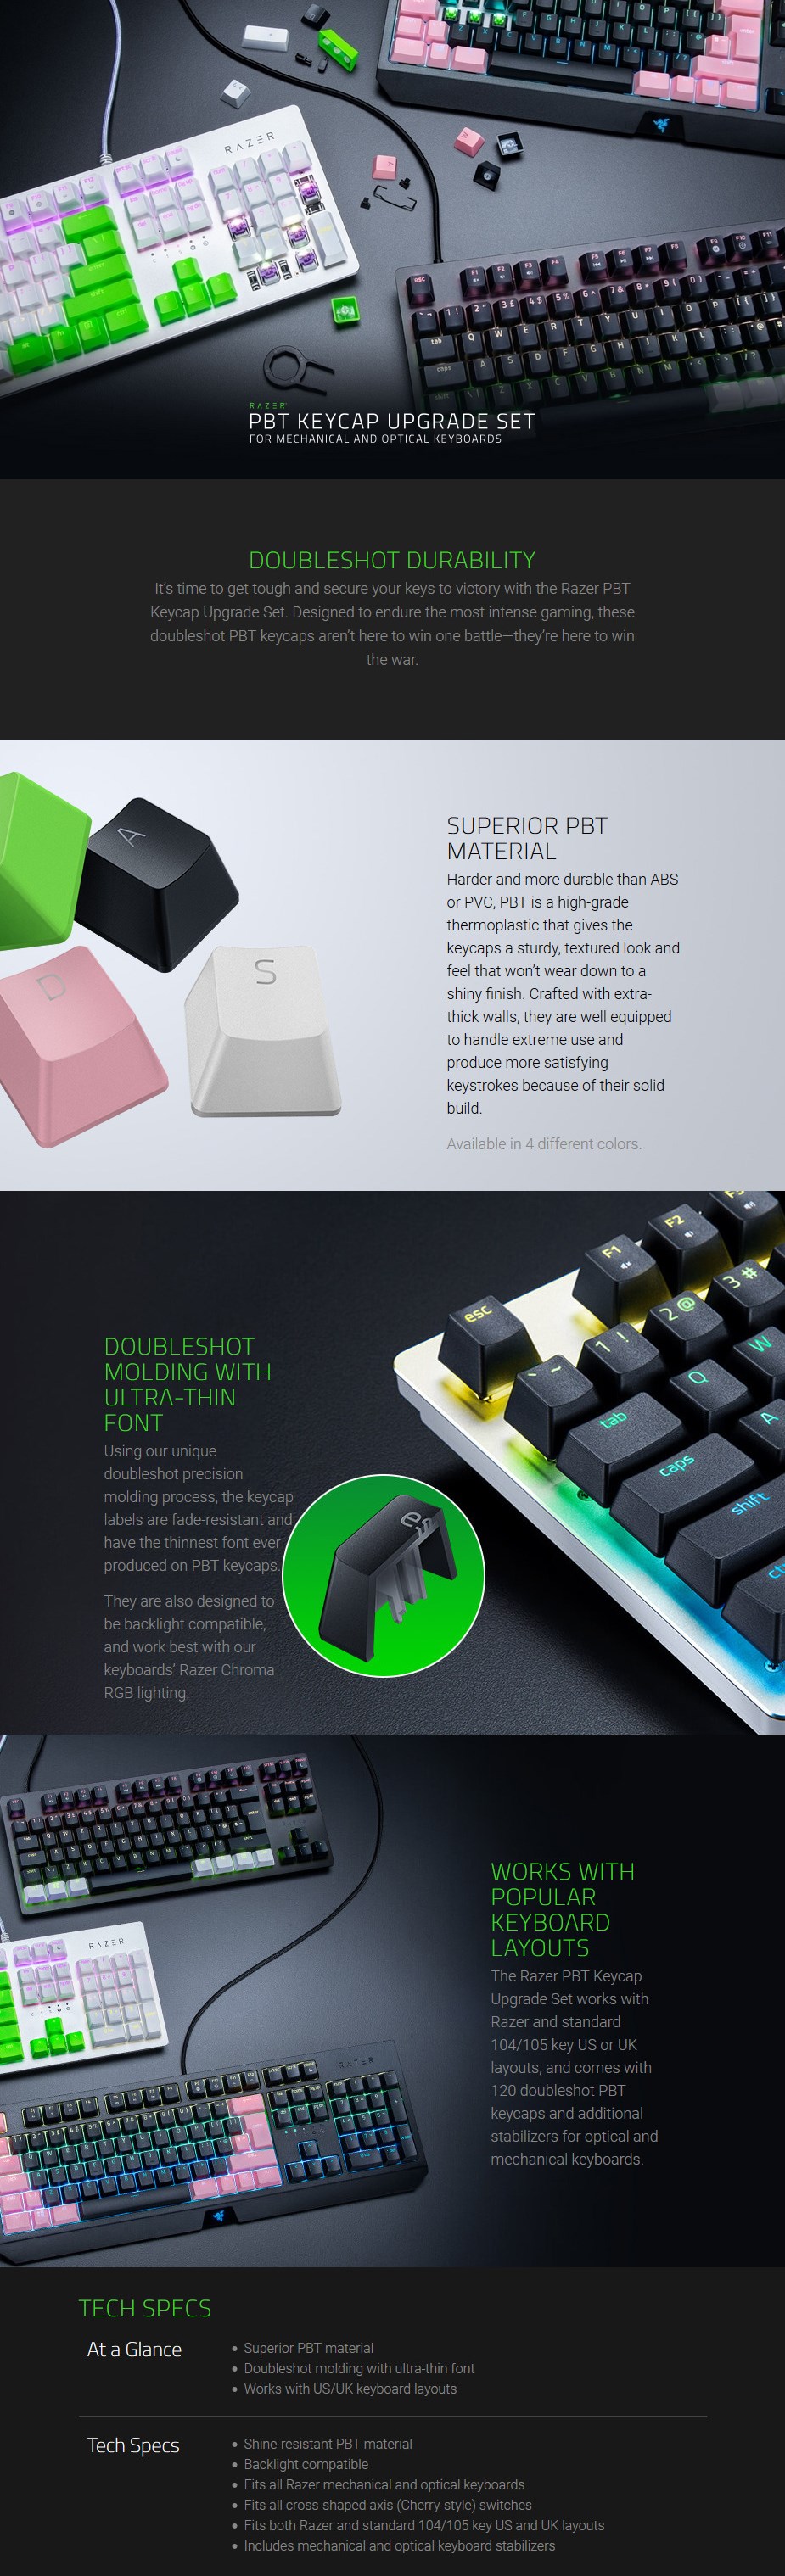 Razer PBT Keycap Upgrade Set For Mechanical and Optical Keyboards - Classic Black RC21-01490100-R3M1 Details